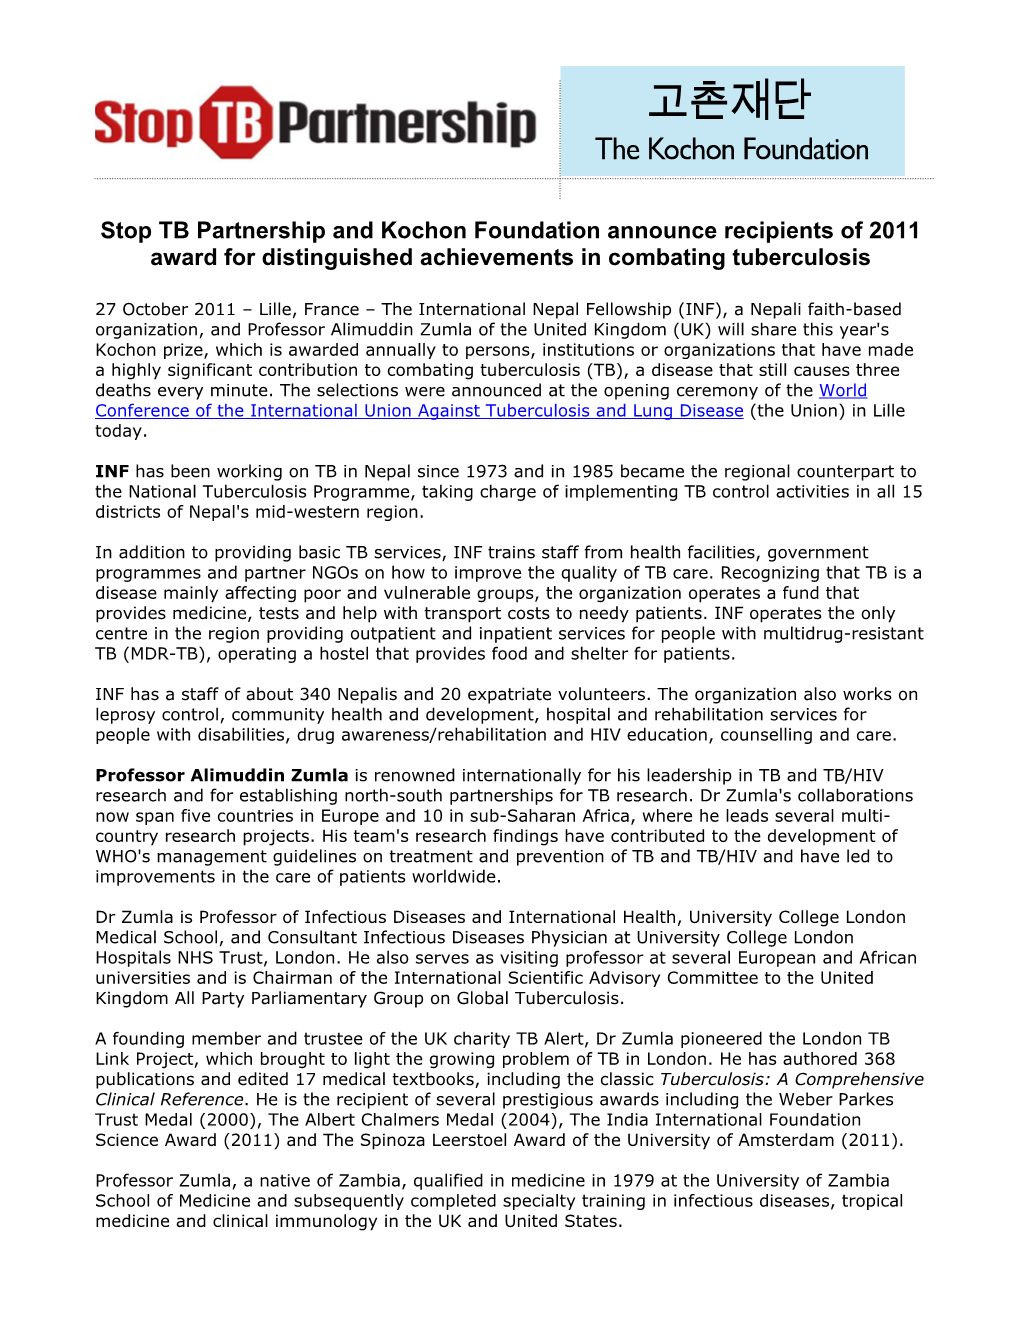 Stop TB Partnership and Kochon Foundation Announce Recipients of 2011 Award for Distinguished Achievements in Combating Tuberculosis